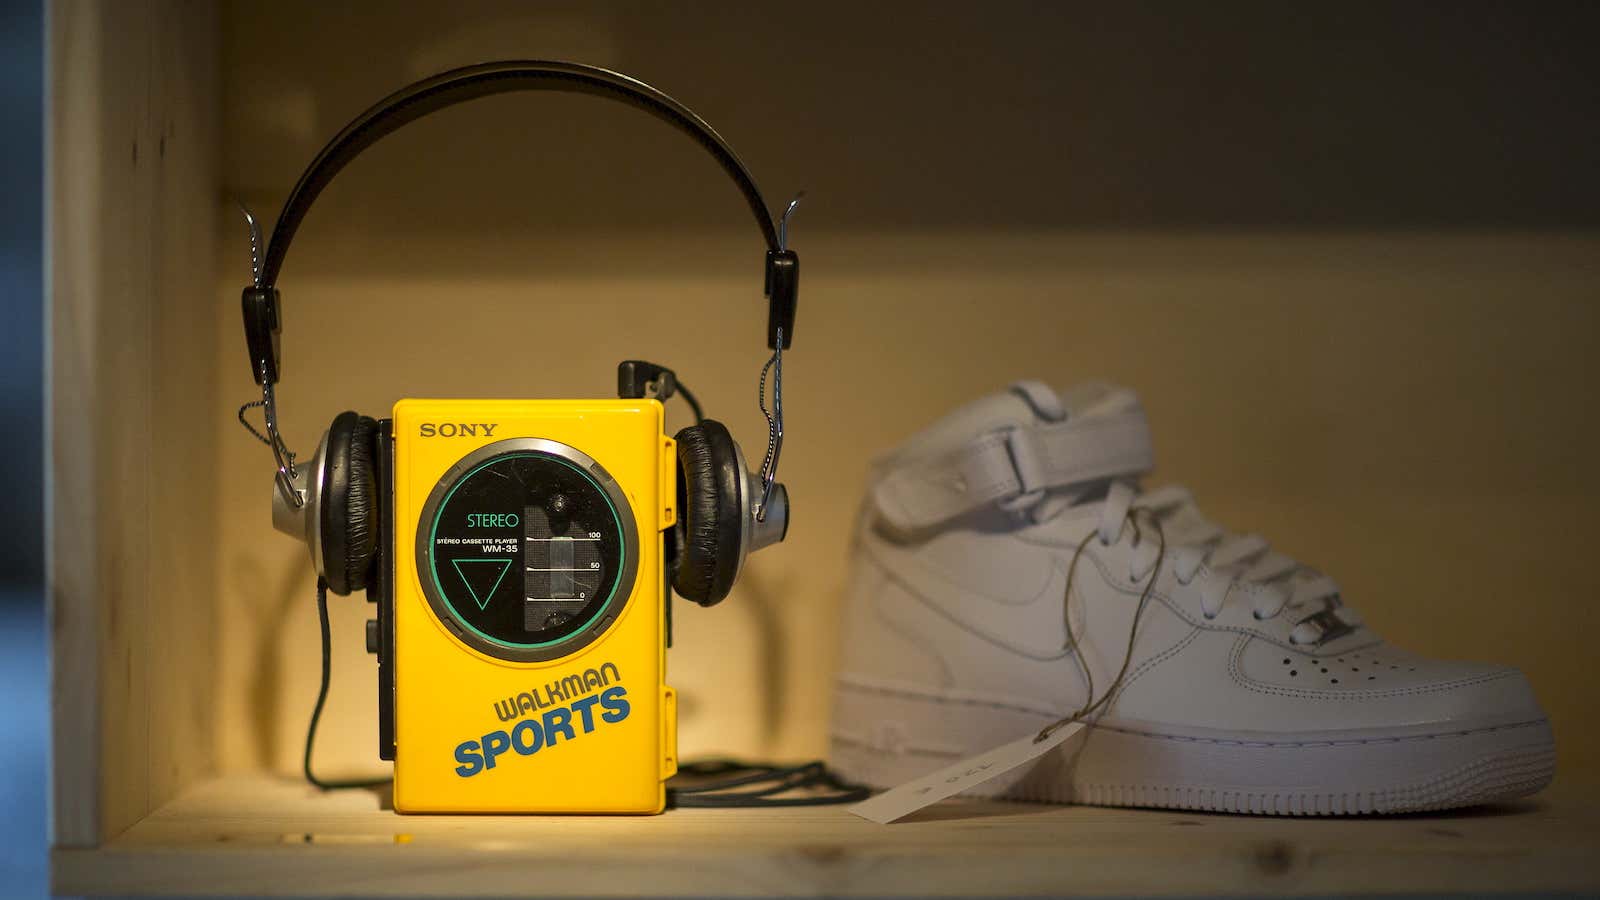 A Brief History of The Walkman - TIME